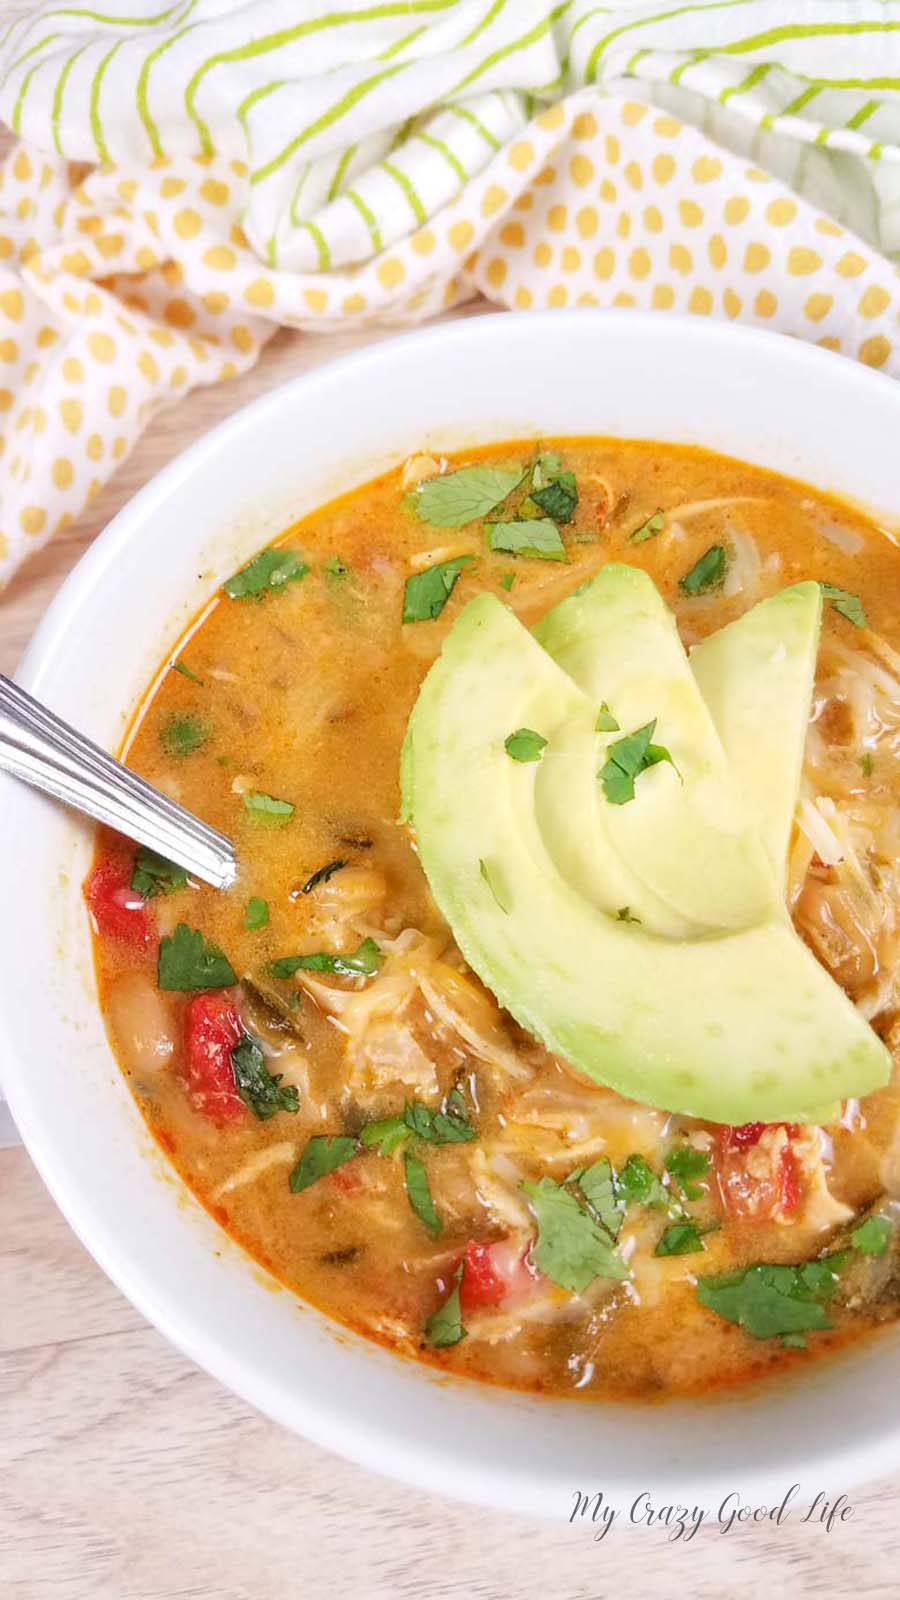 The Best 21 Day Fix Chili Recipes : My Crazy Good Life